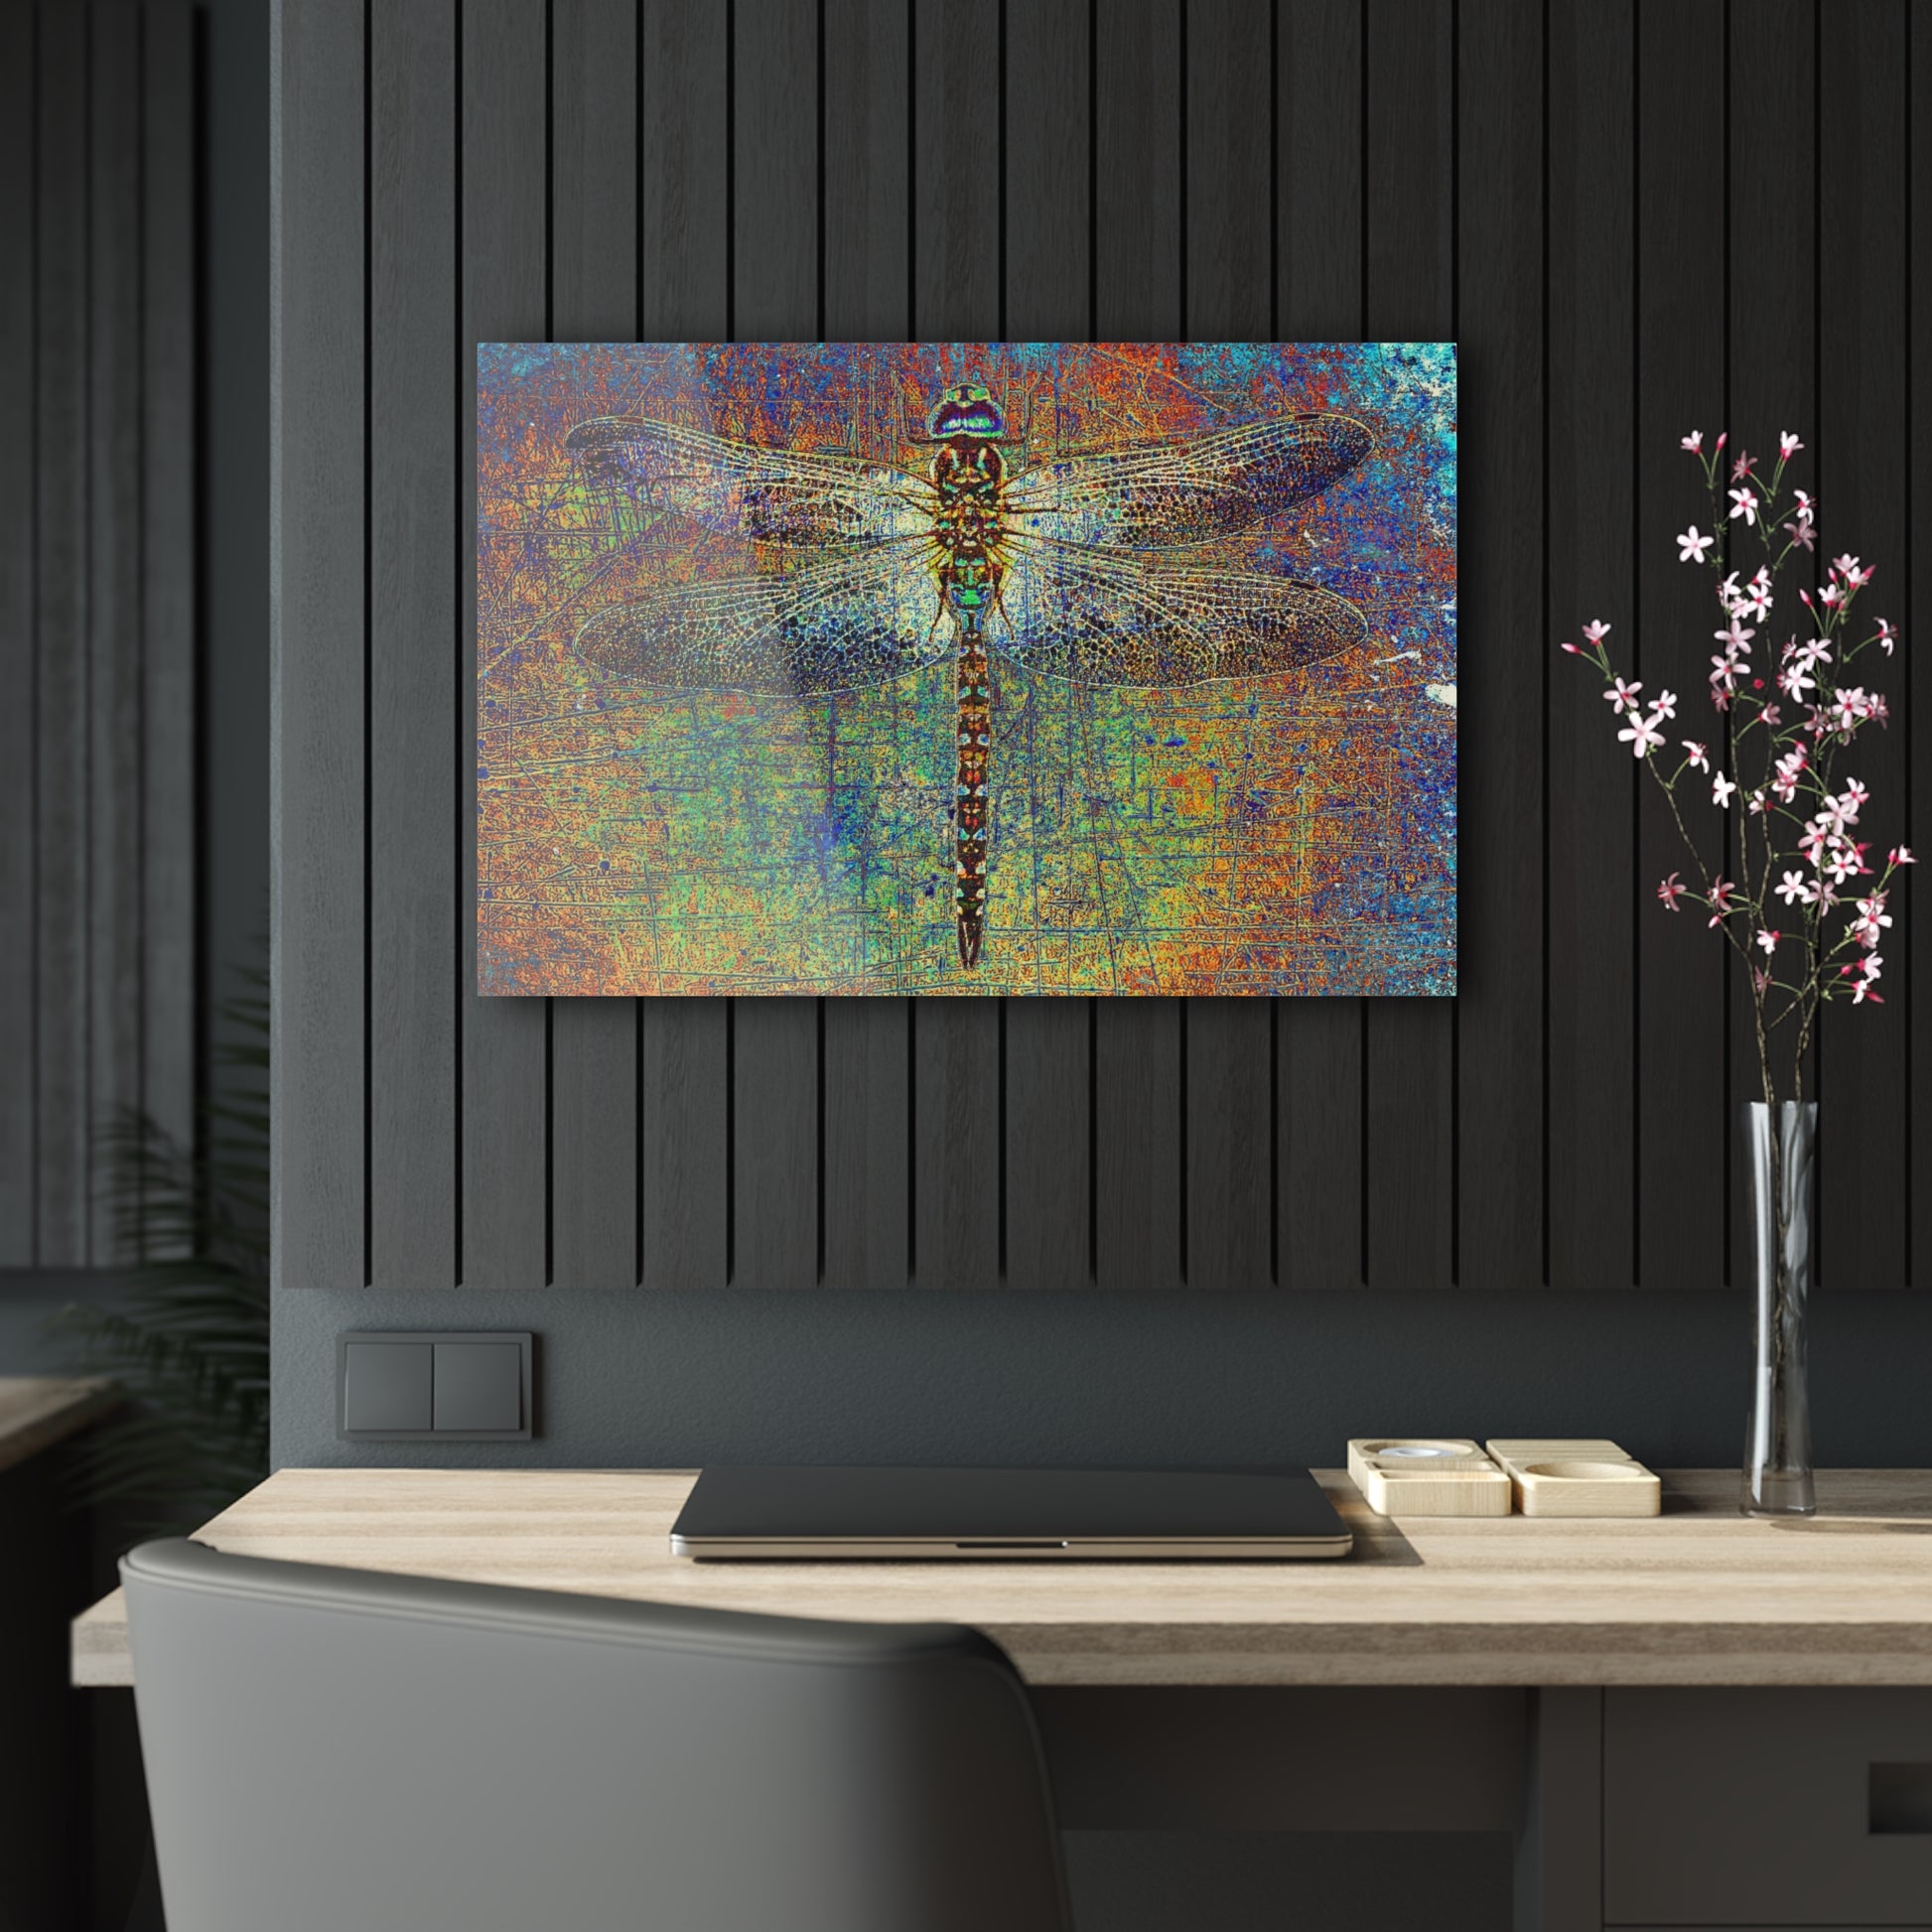 Dragonfly on Multicolor Background Printed on a Crystal Clear Acrylic Panel 30x20 hung on dark wall